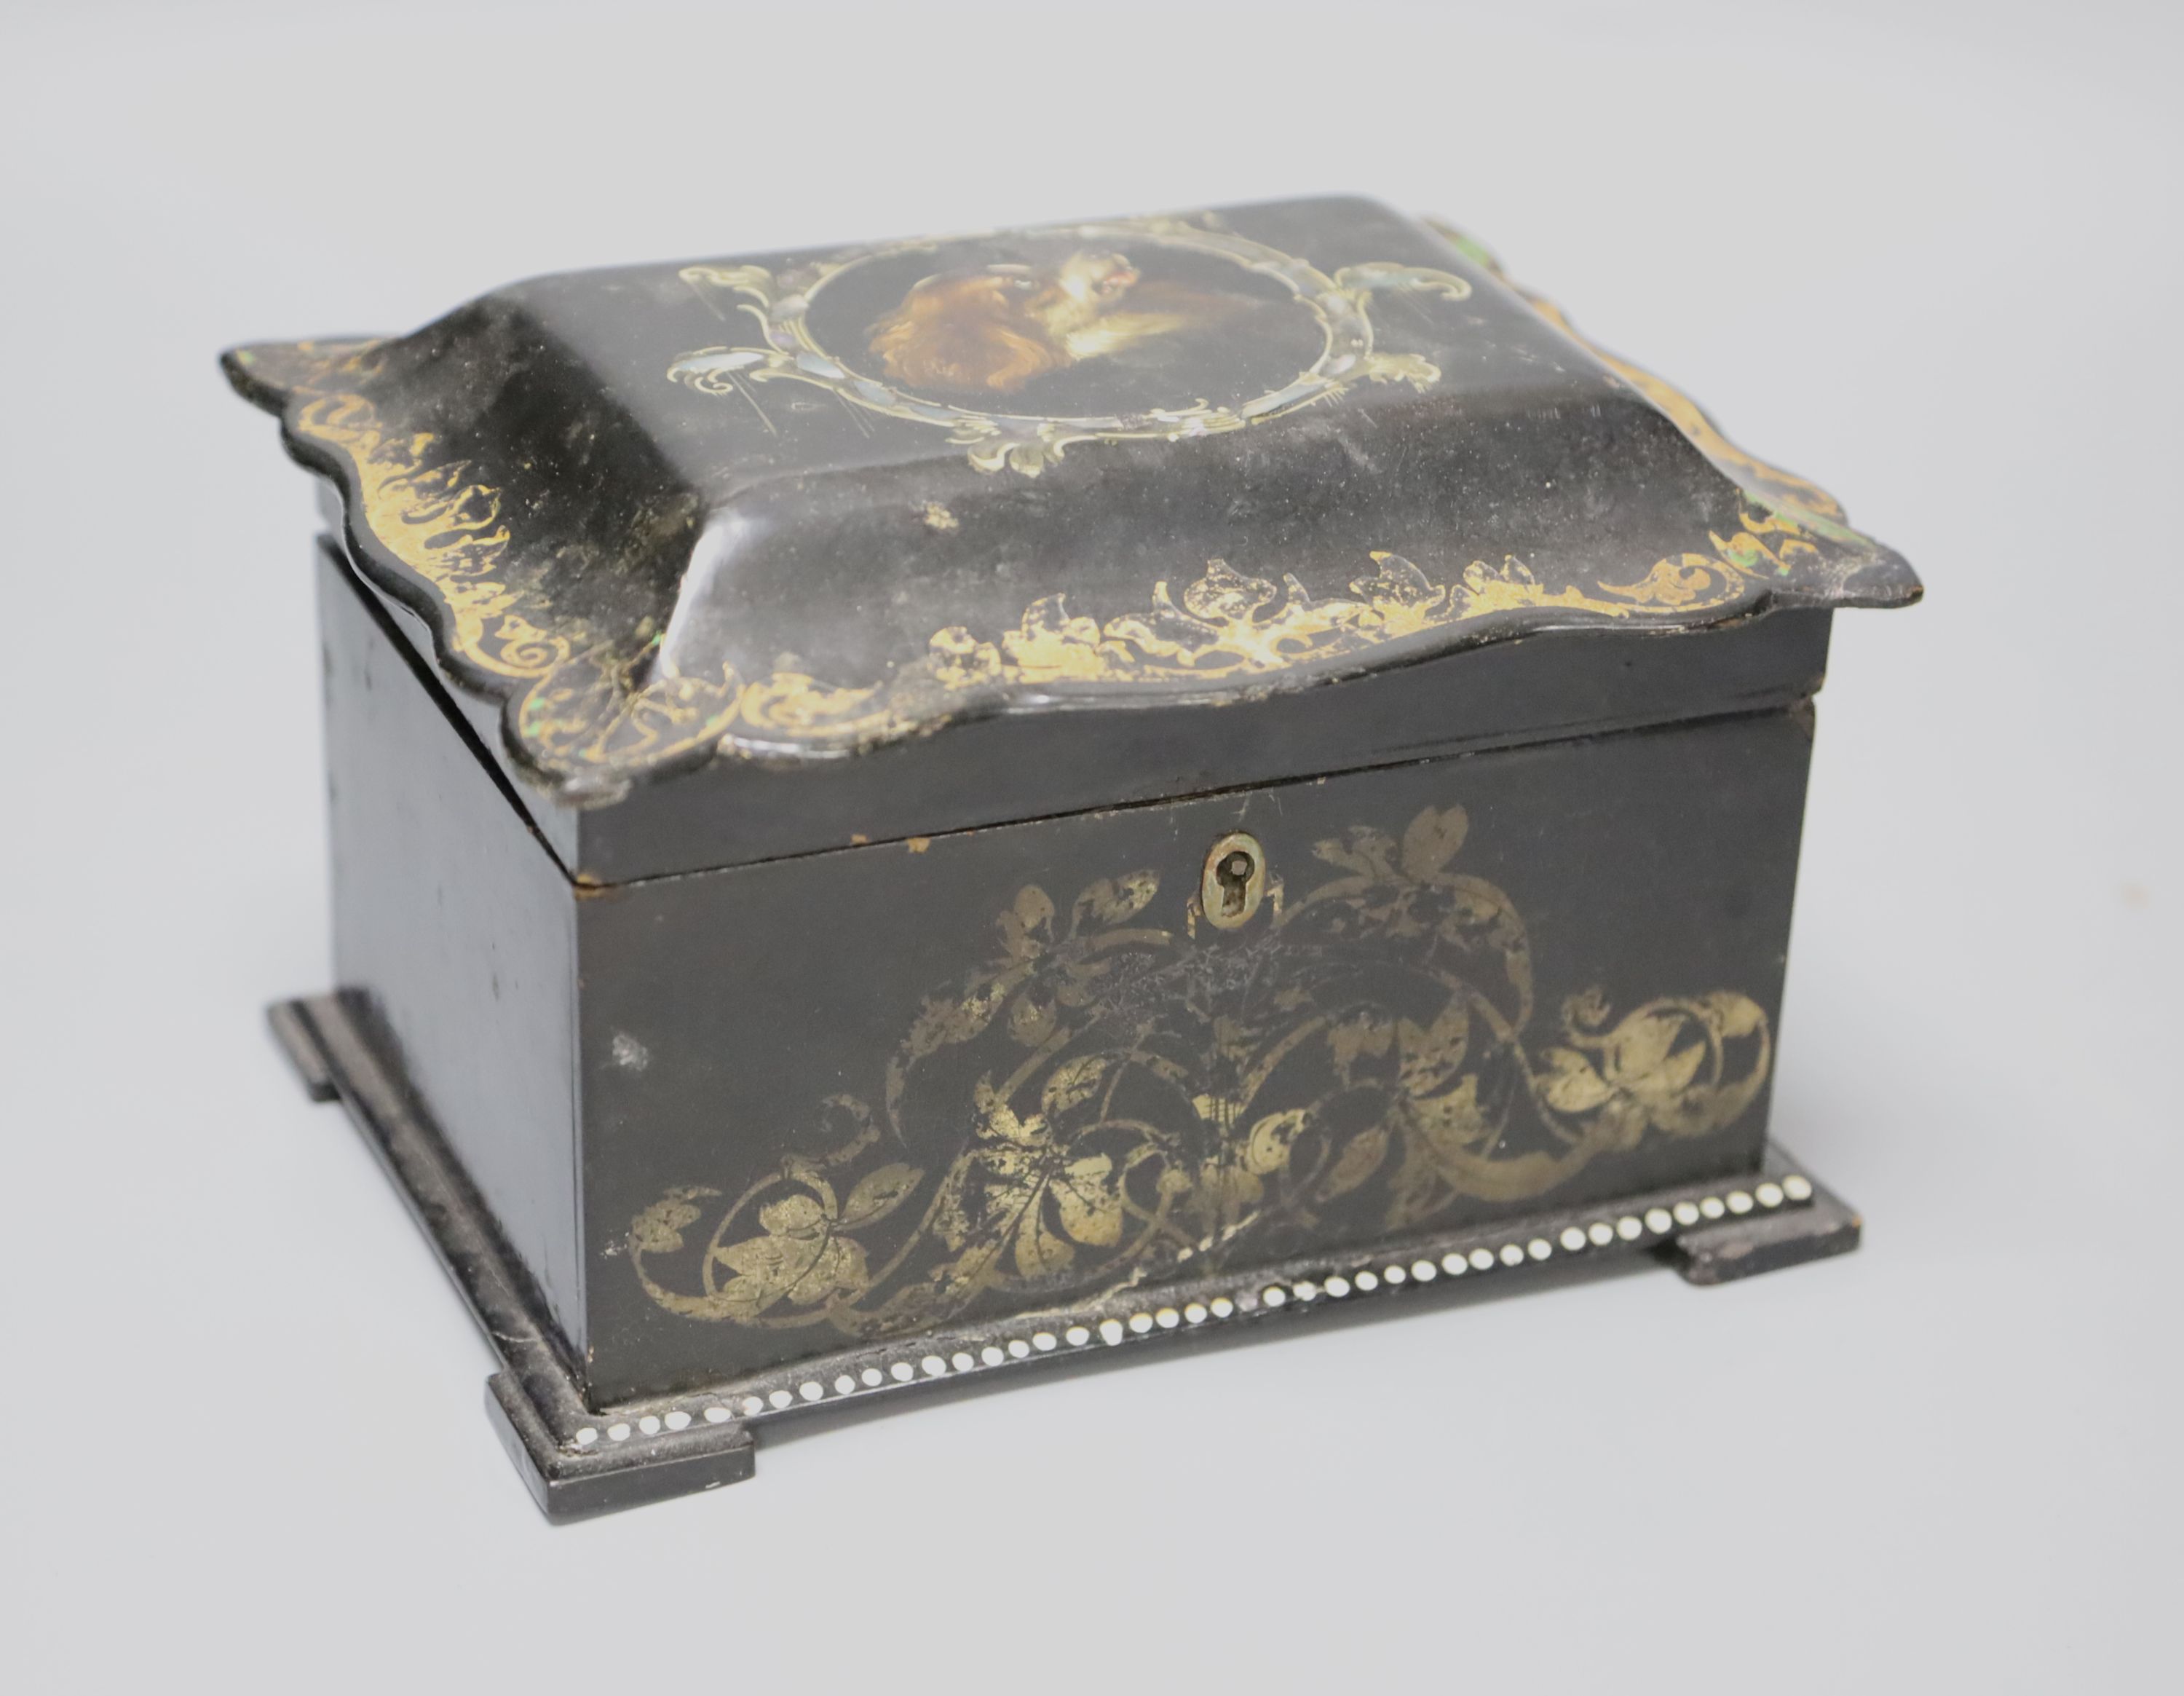 A 19th century black papier mache tea caddy cover painted with a central cartouche of a dogs head